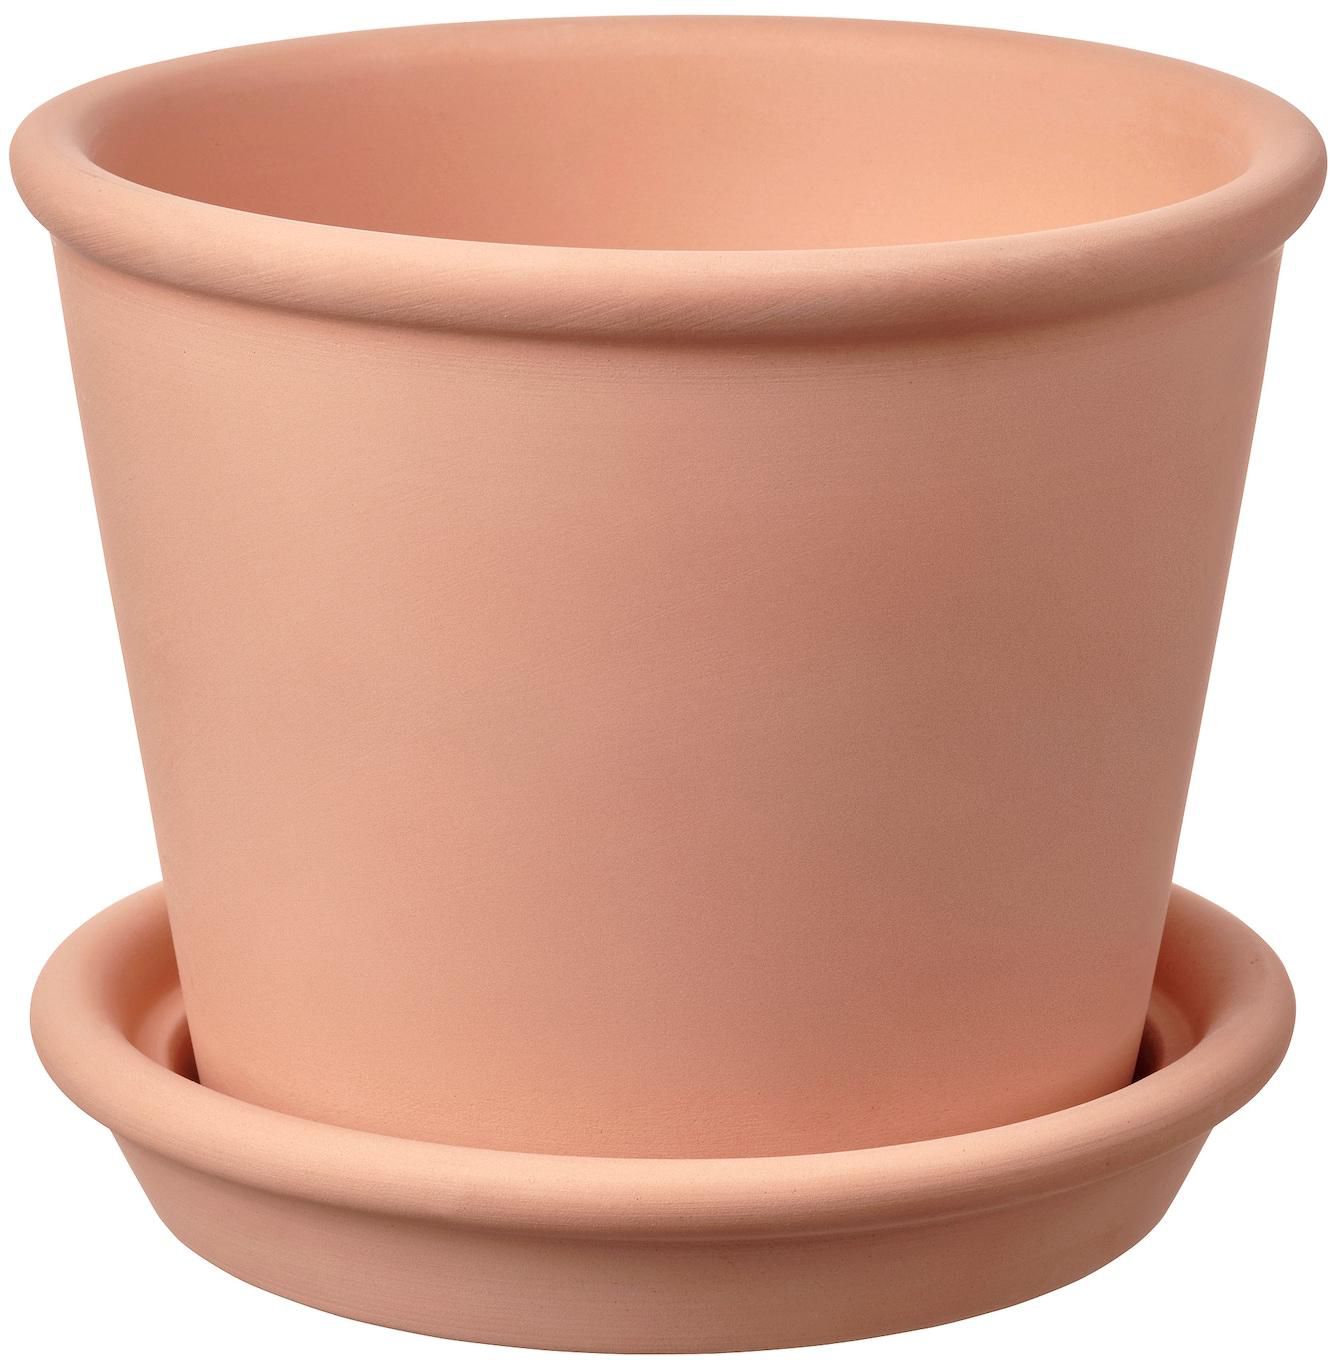 MUSKOTBLOMMA Plant pot with saucer - in/outdoor terracotta 12 cm